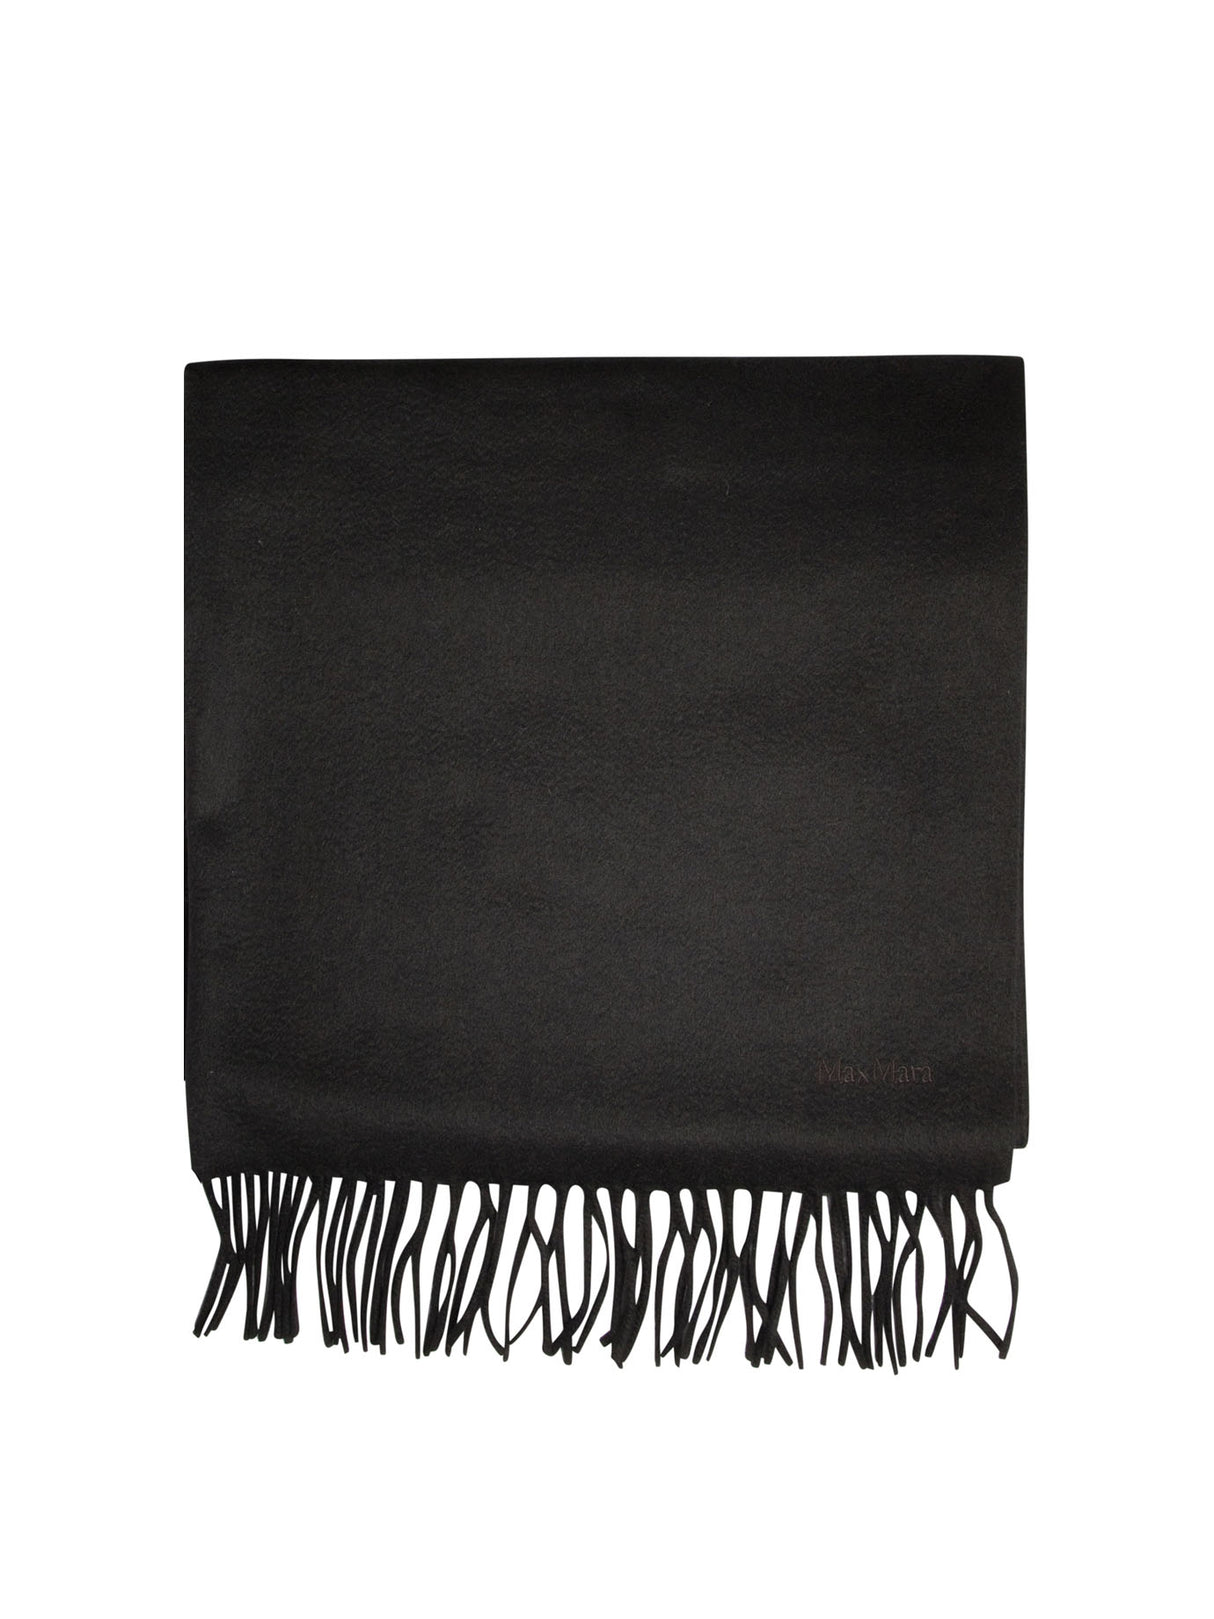 MAX MARA CASHMERE STOLE WITH Embroidered